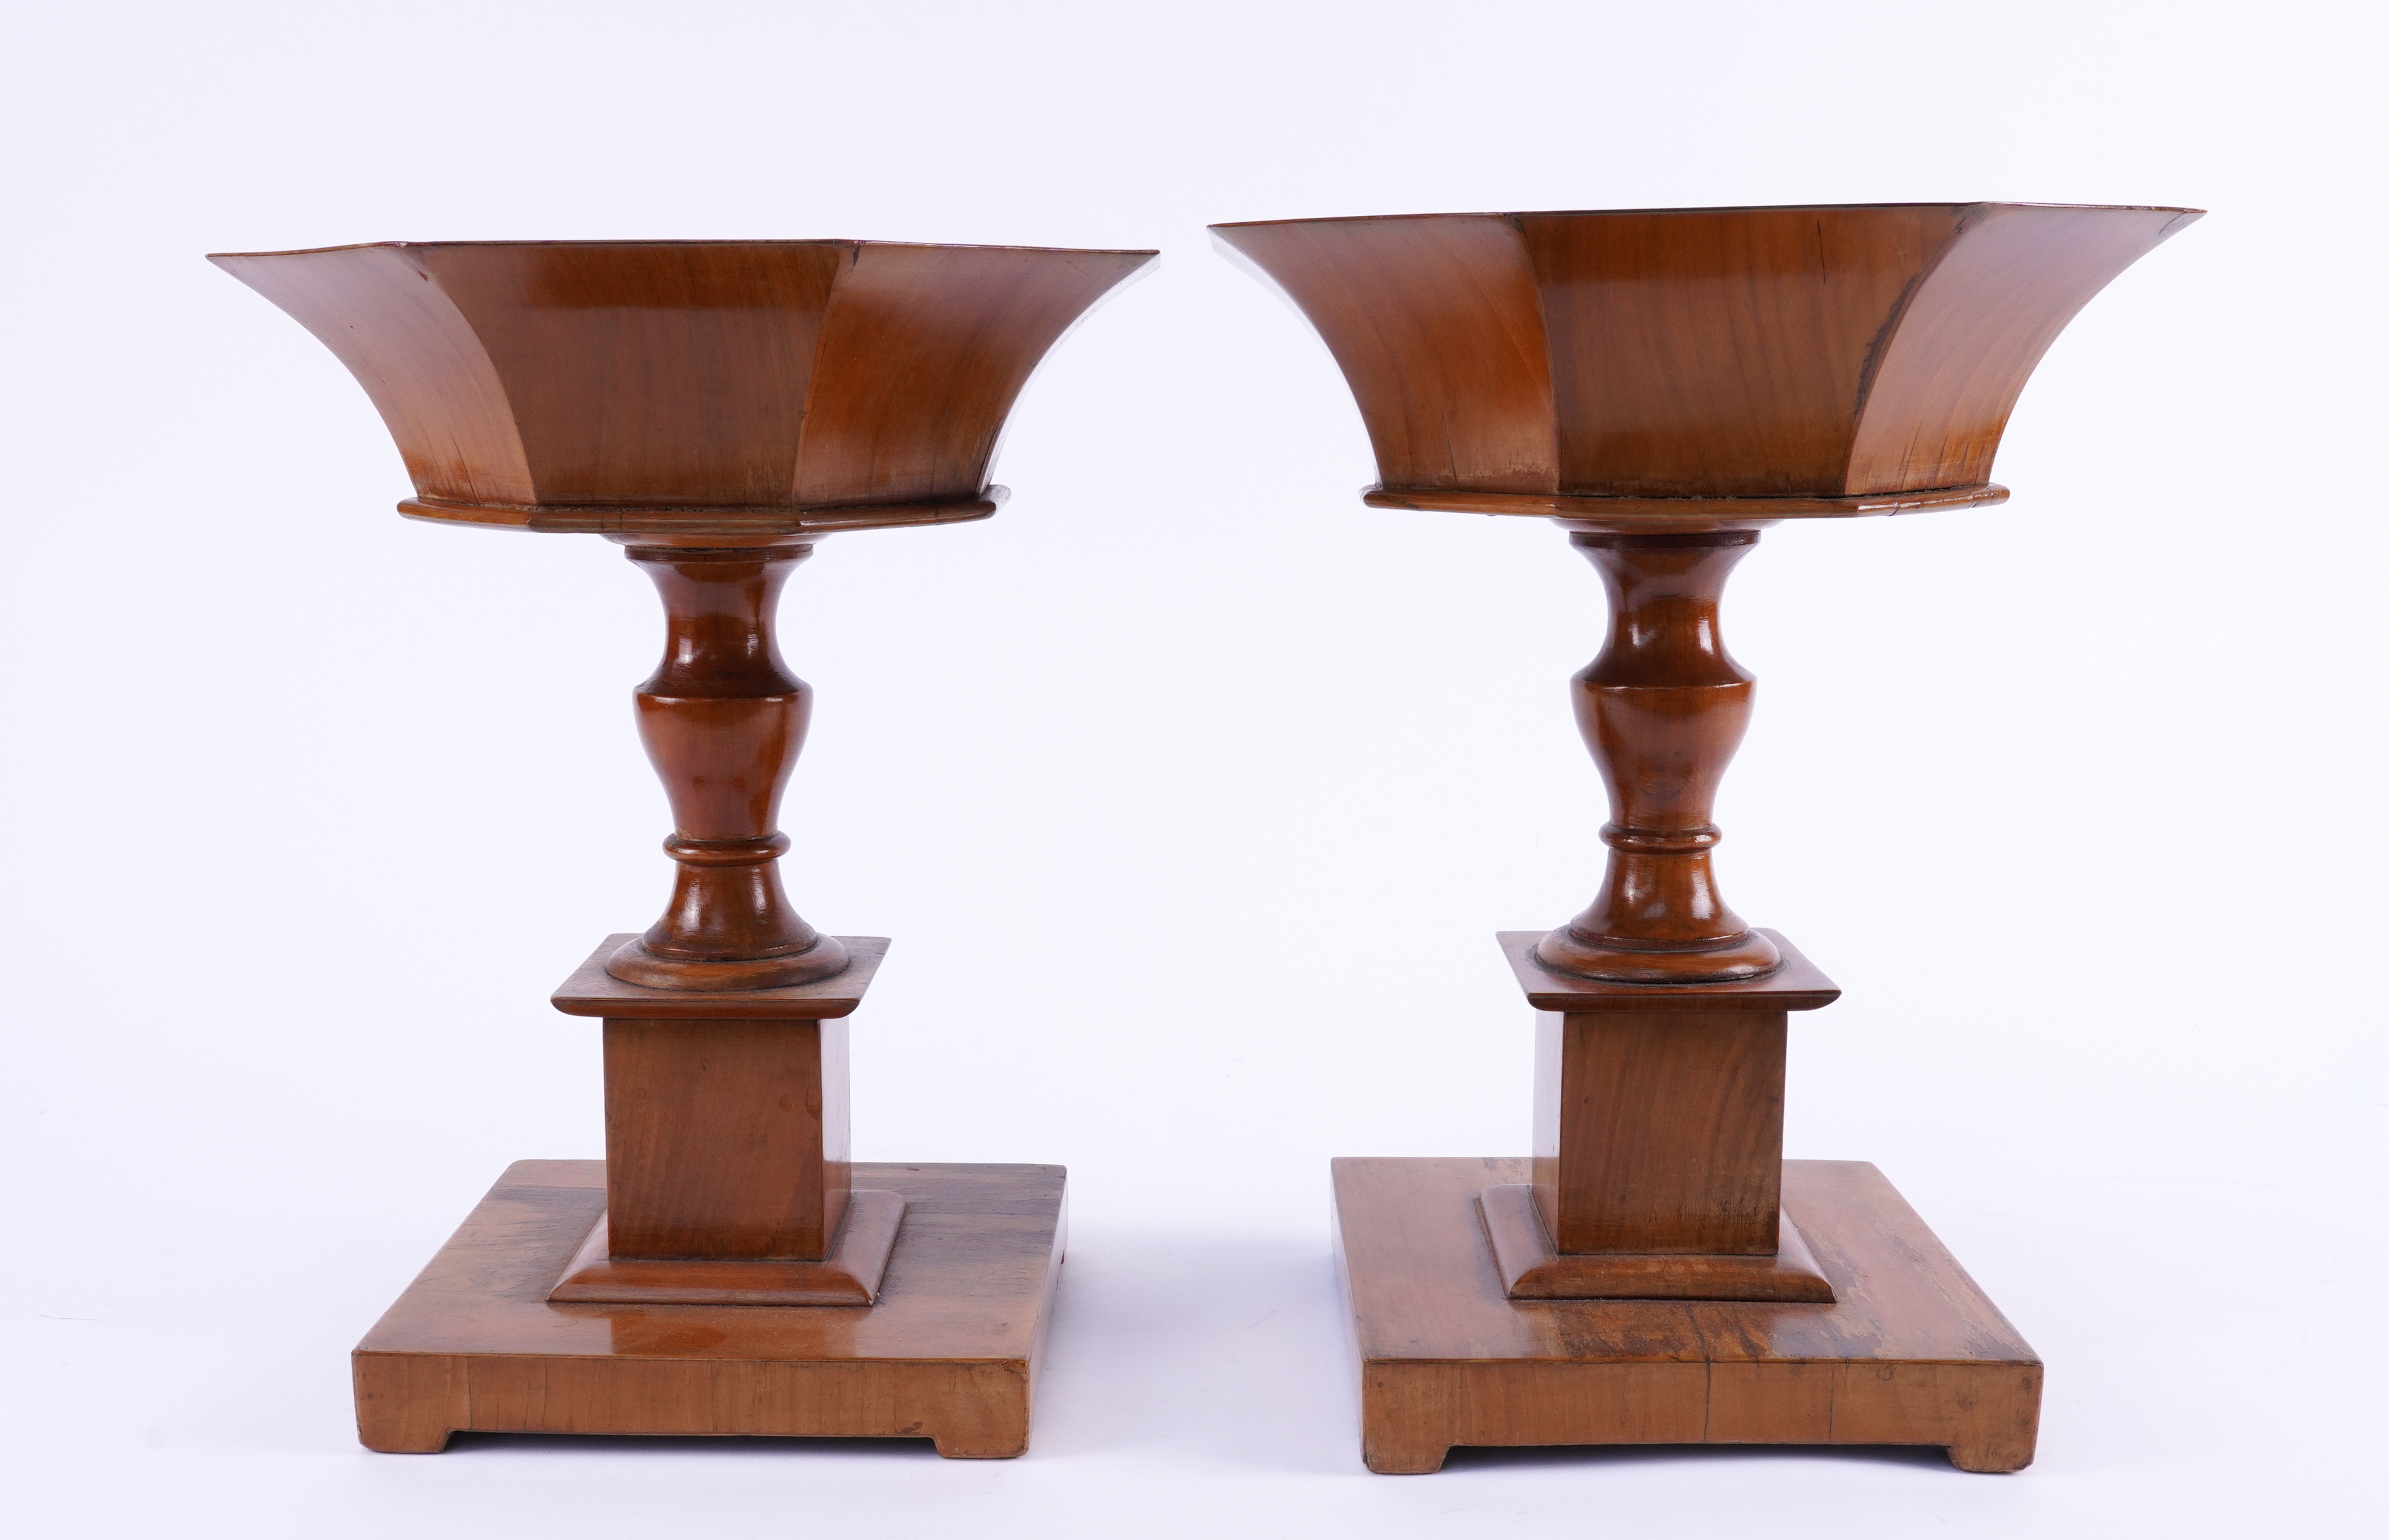 A PAIR OF FRUITWOOD OCTAGONAL TAZZA OR TABLE JARDINIERES (2)